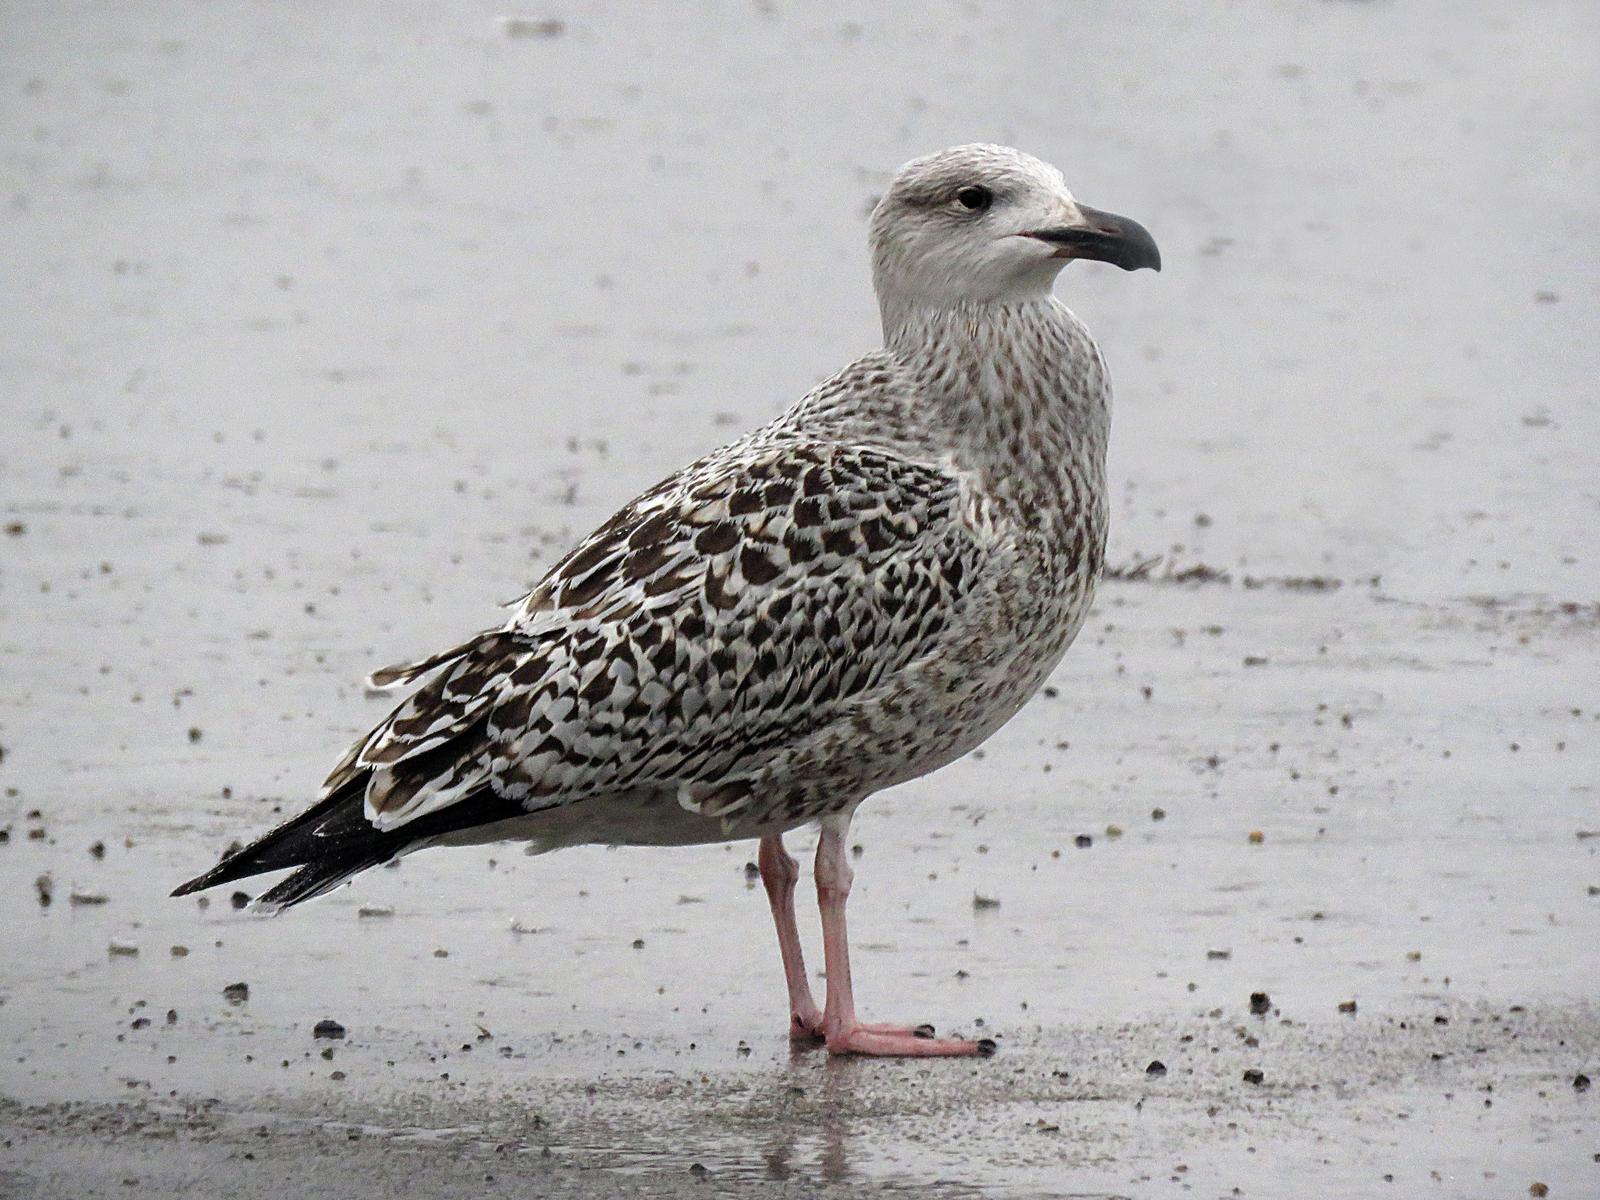 Great Black-backed Gull Photo by Kathy Carroll